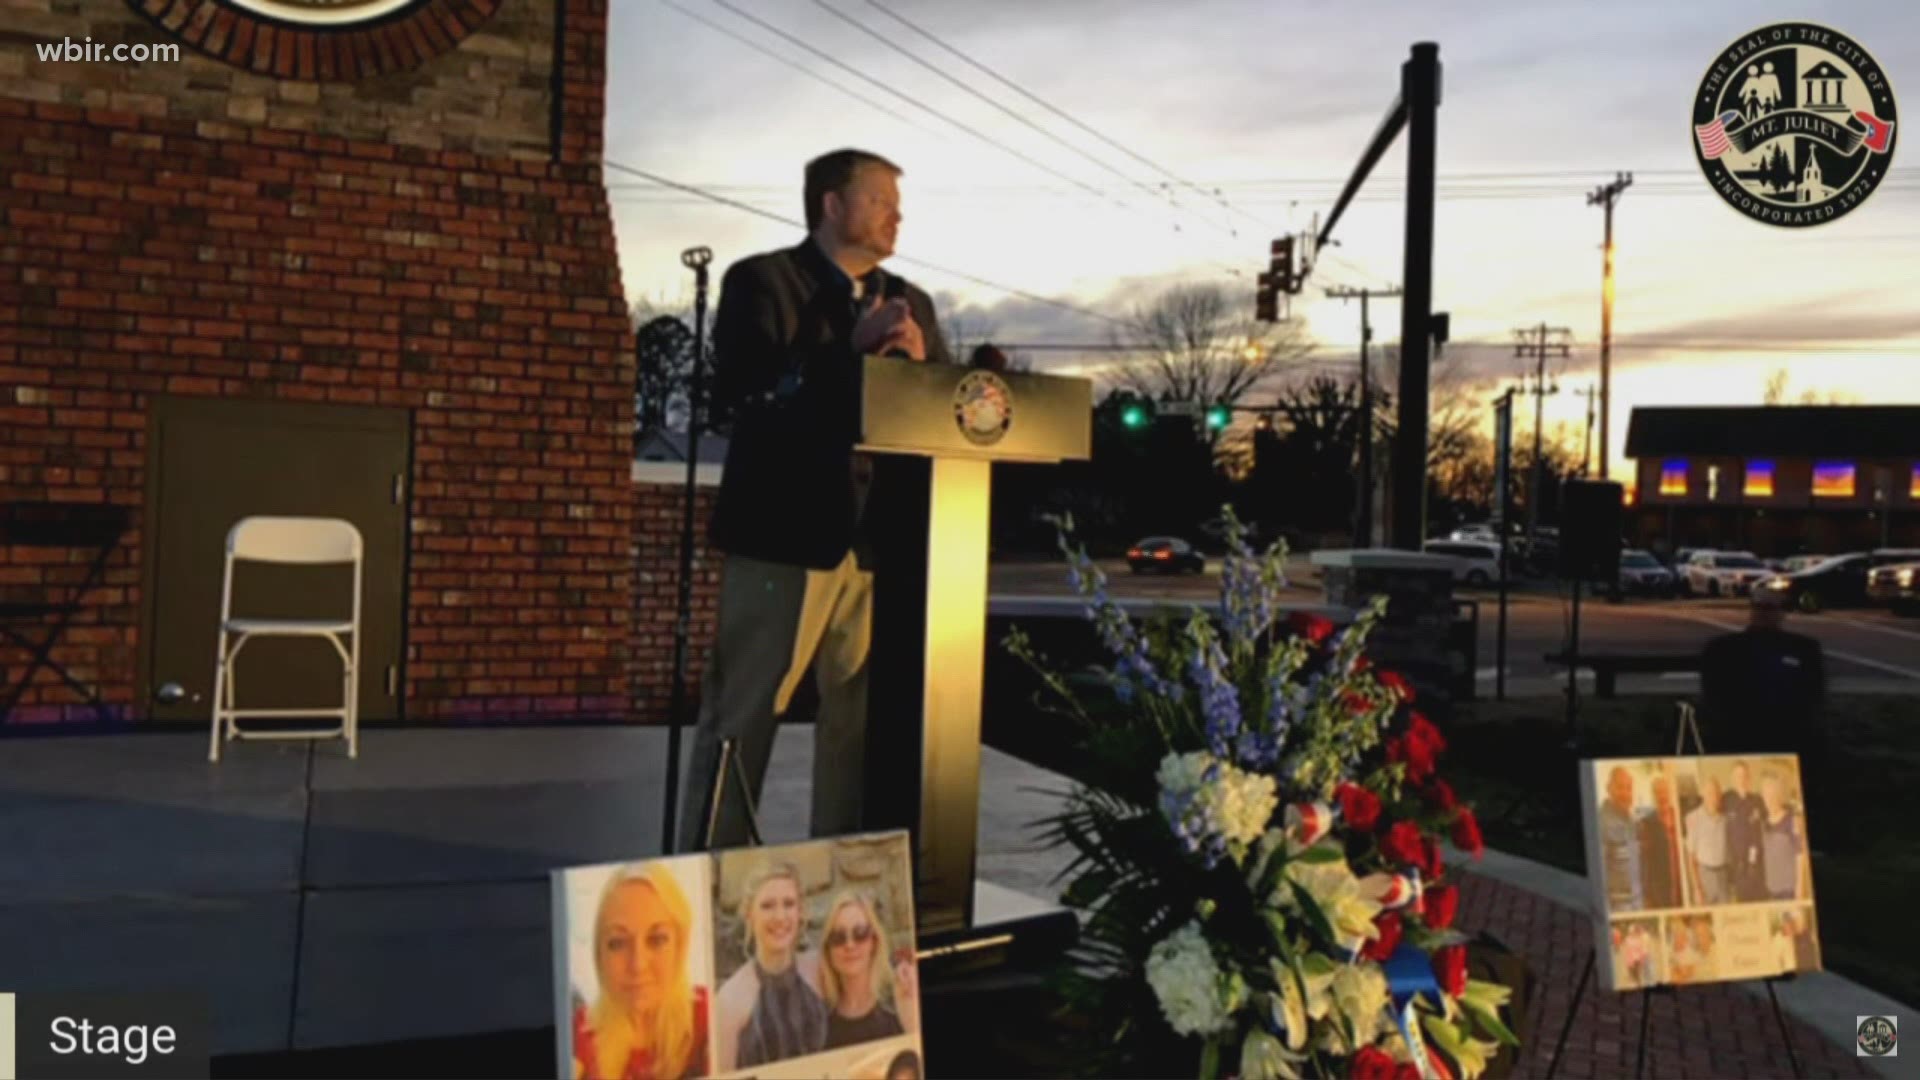 A memorial was held honoring victims killed during last year's tornadoes. Officials said 25 people died in both the Nashville and Cookeville areas.